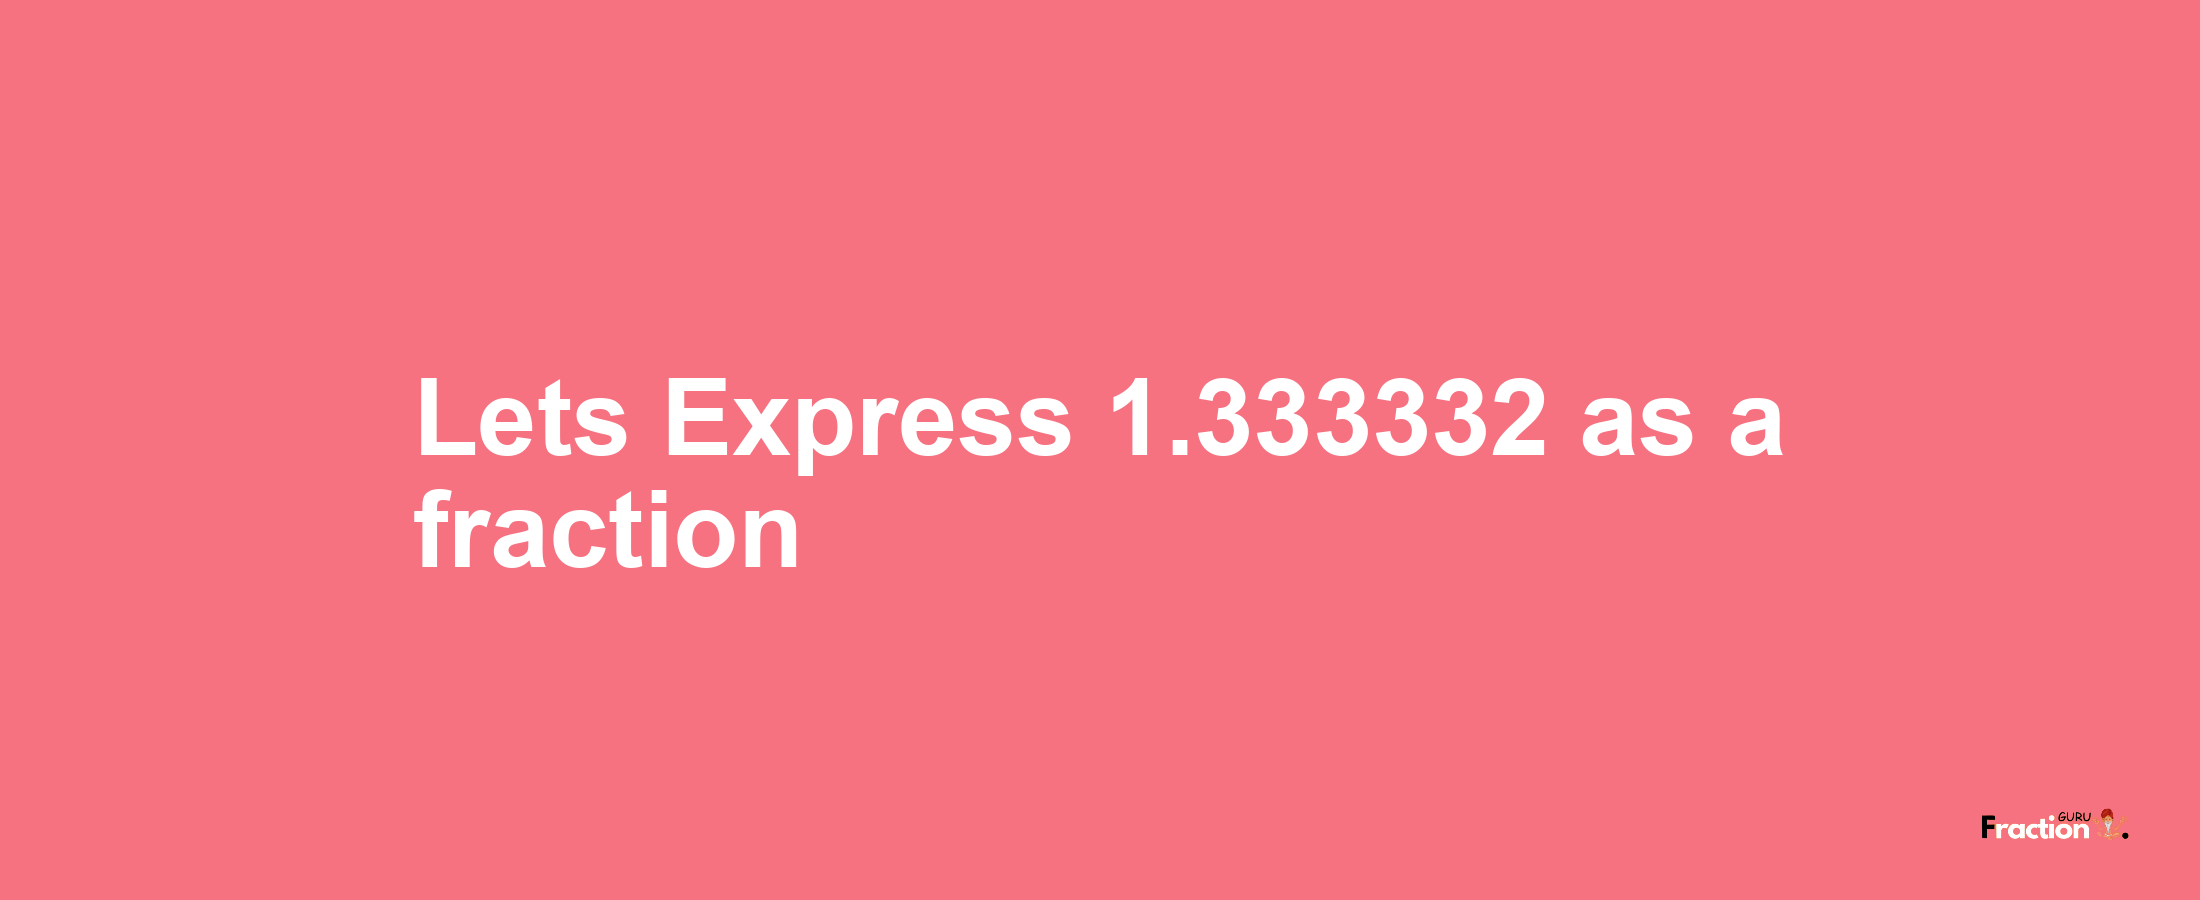 Lets Express 1.333332 as afraction